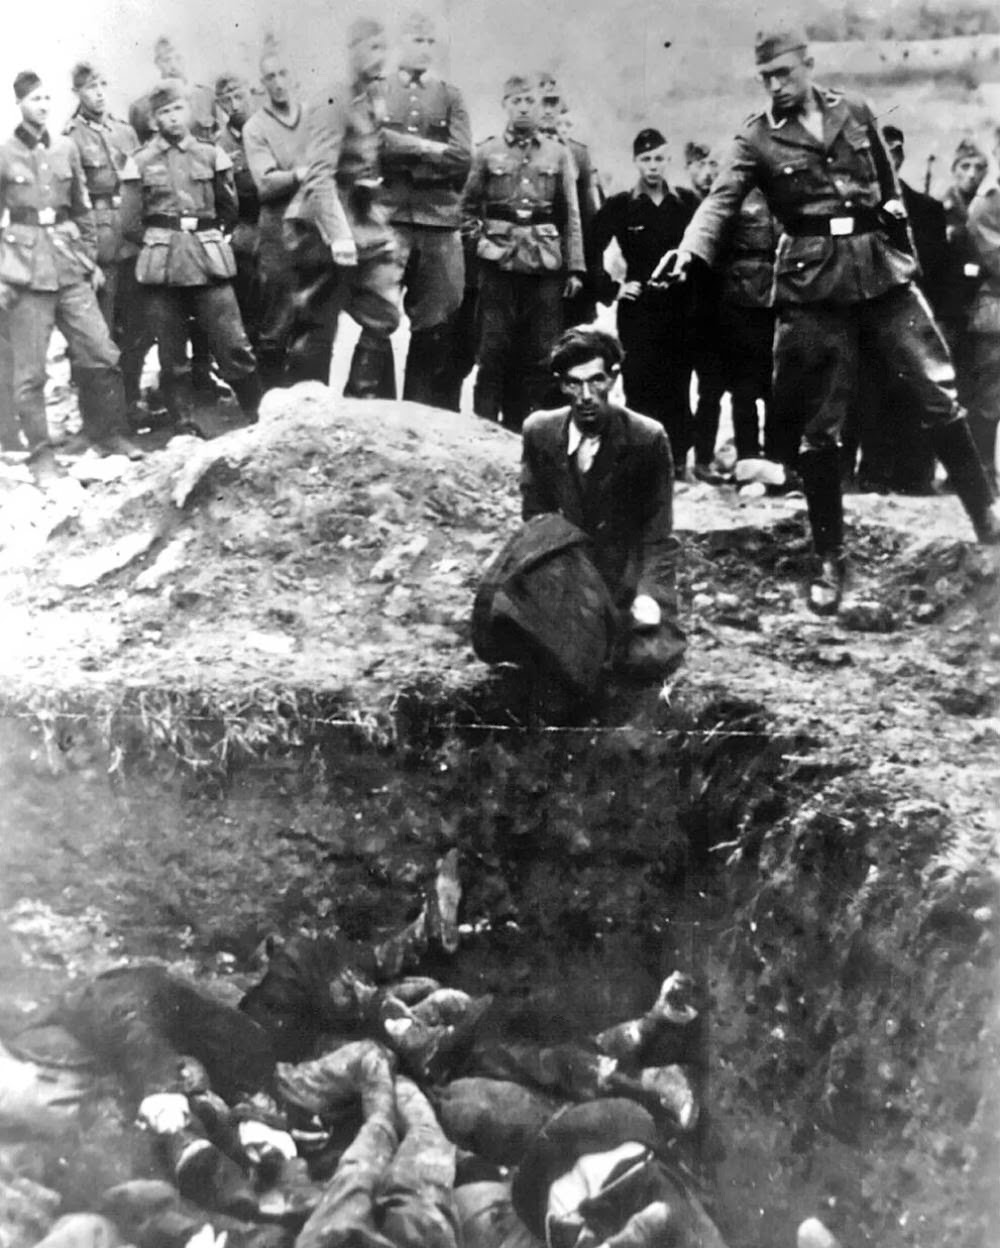 The last Jew in Vinnitsa  Member of Einsatzgruppe D (a Nazi SS death squad) is just about to shoot a Jewish man kneeling before a filled mass grave in Vinnitsa, Ukraine, in 1941. All 28,000 Jews from Vinnitsa and its surrounding areas were massacred.